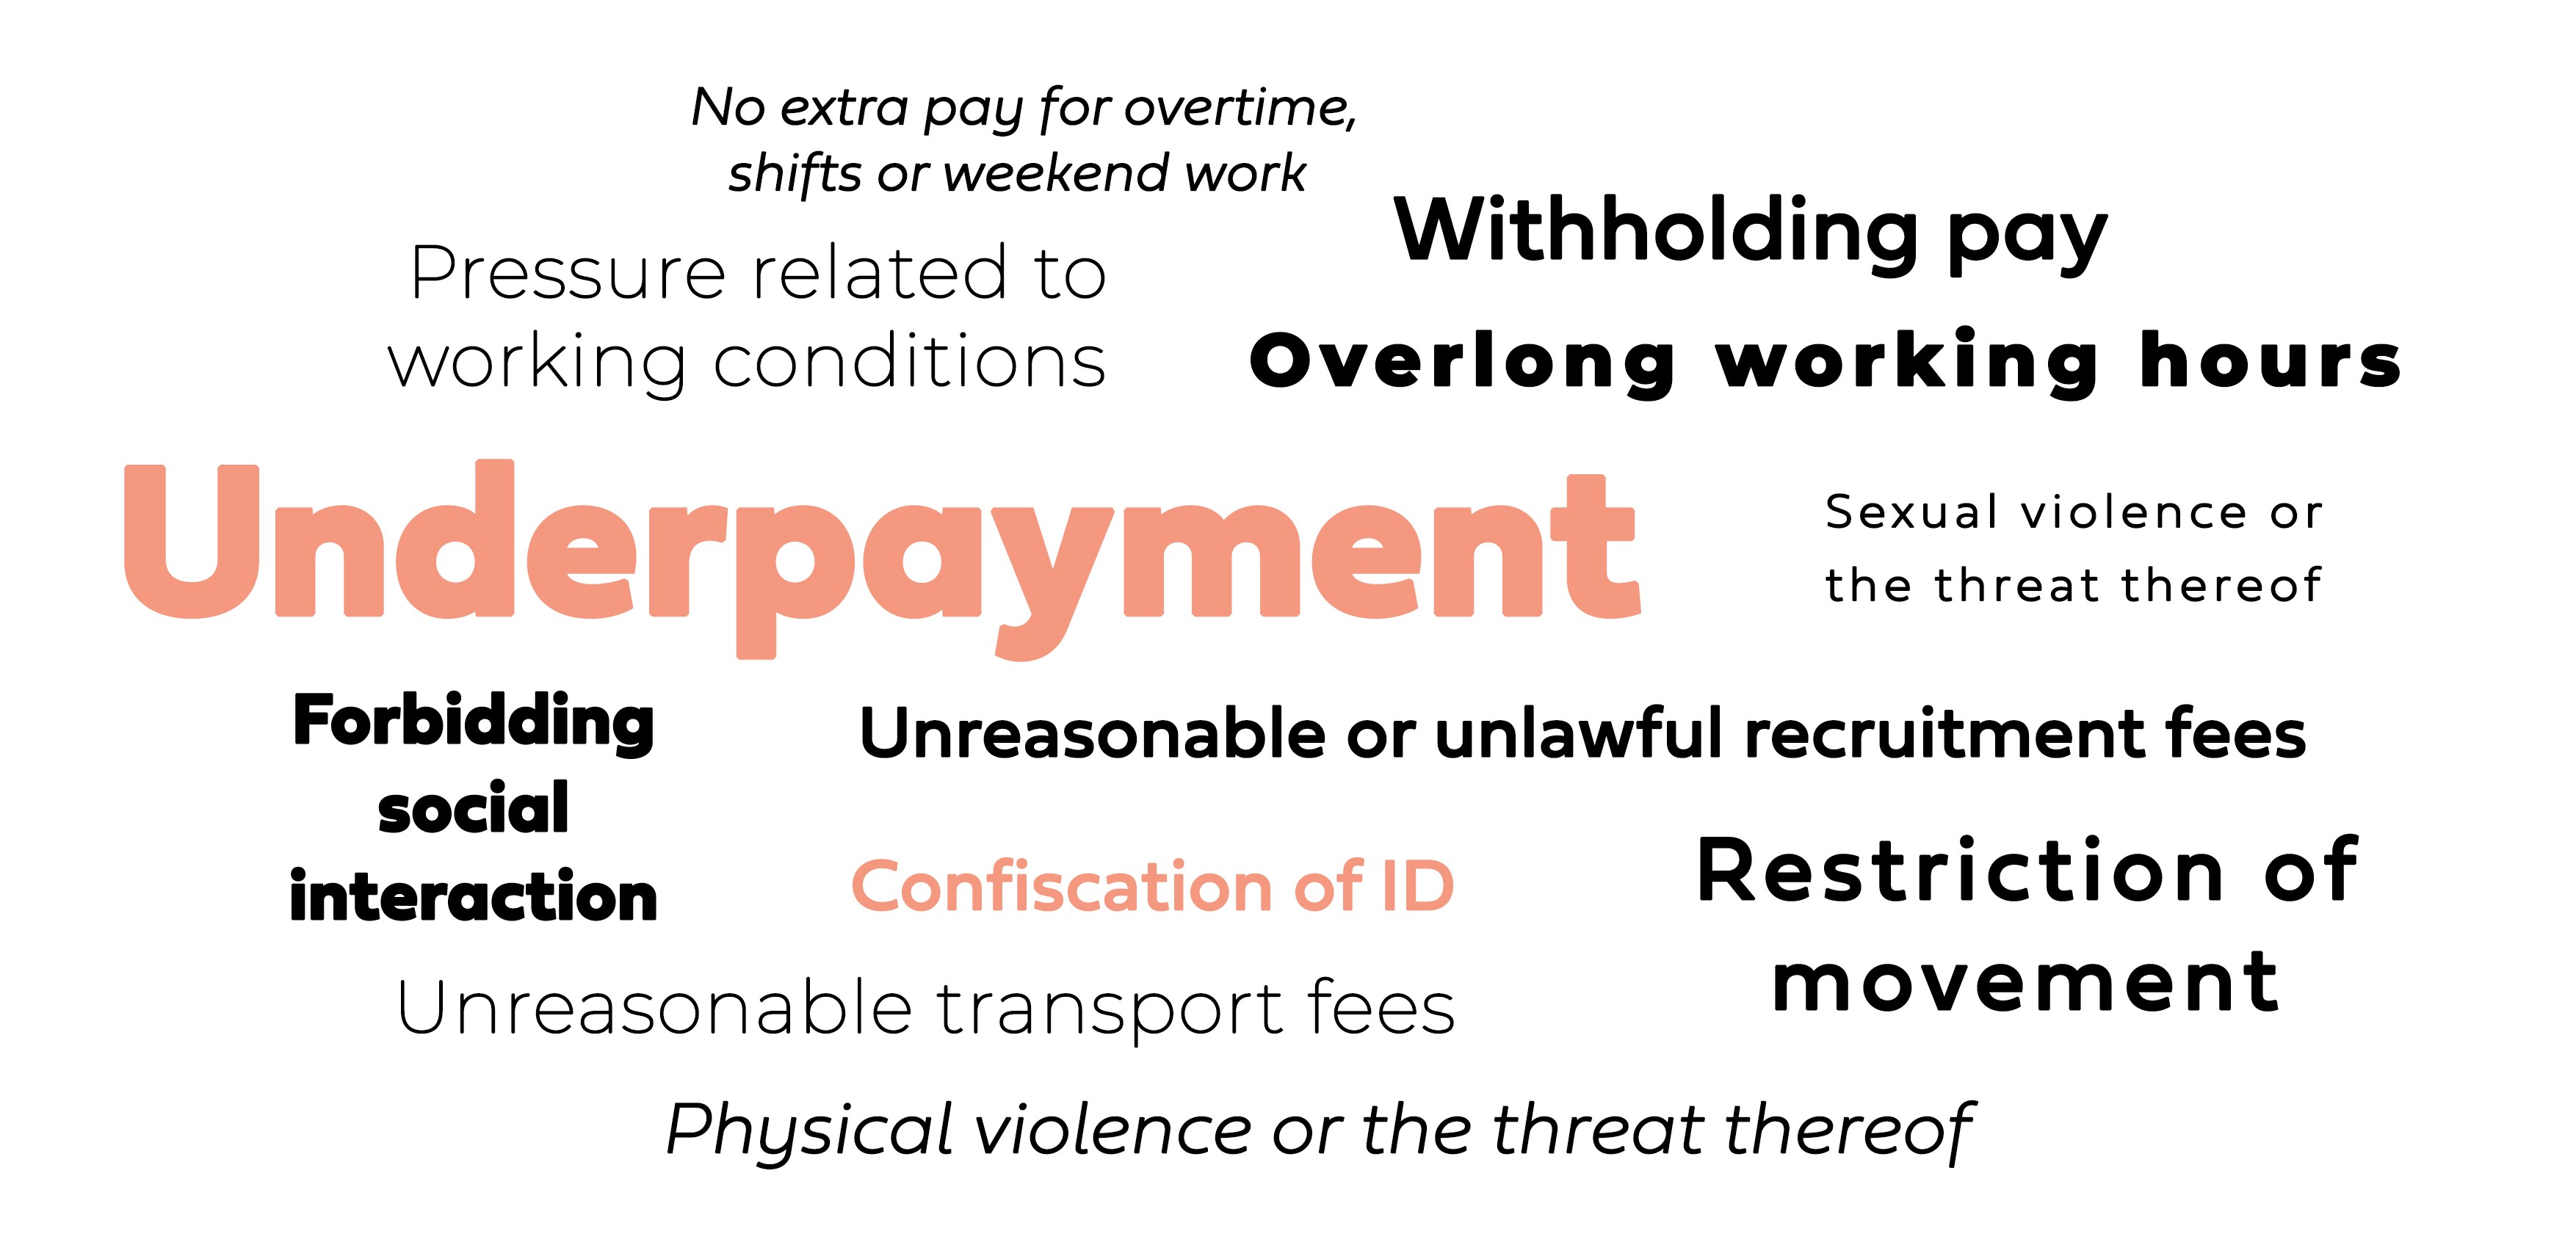 Word cloud, biggest words: underpayment, restriction of movement and withholding pay 